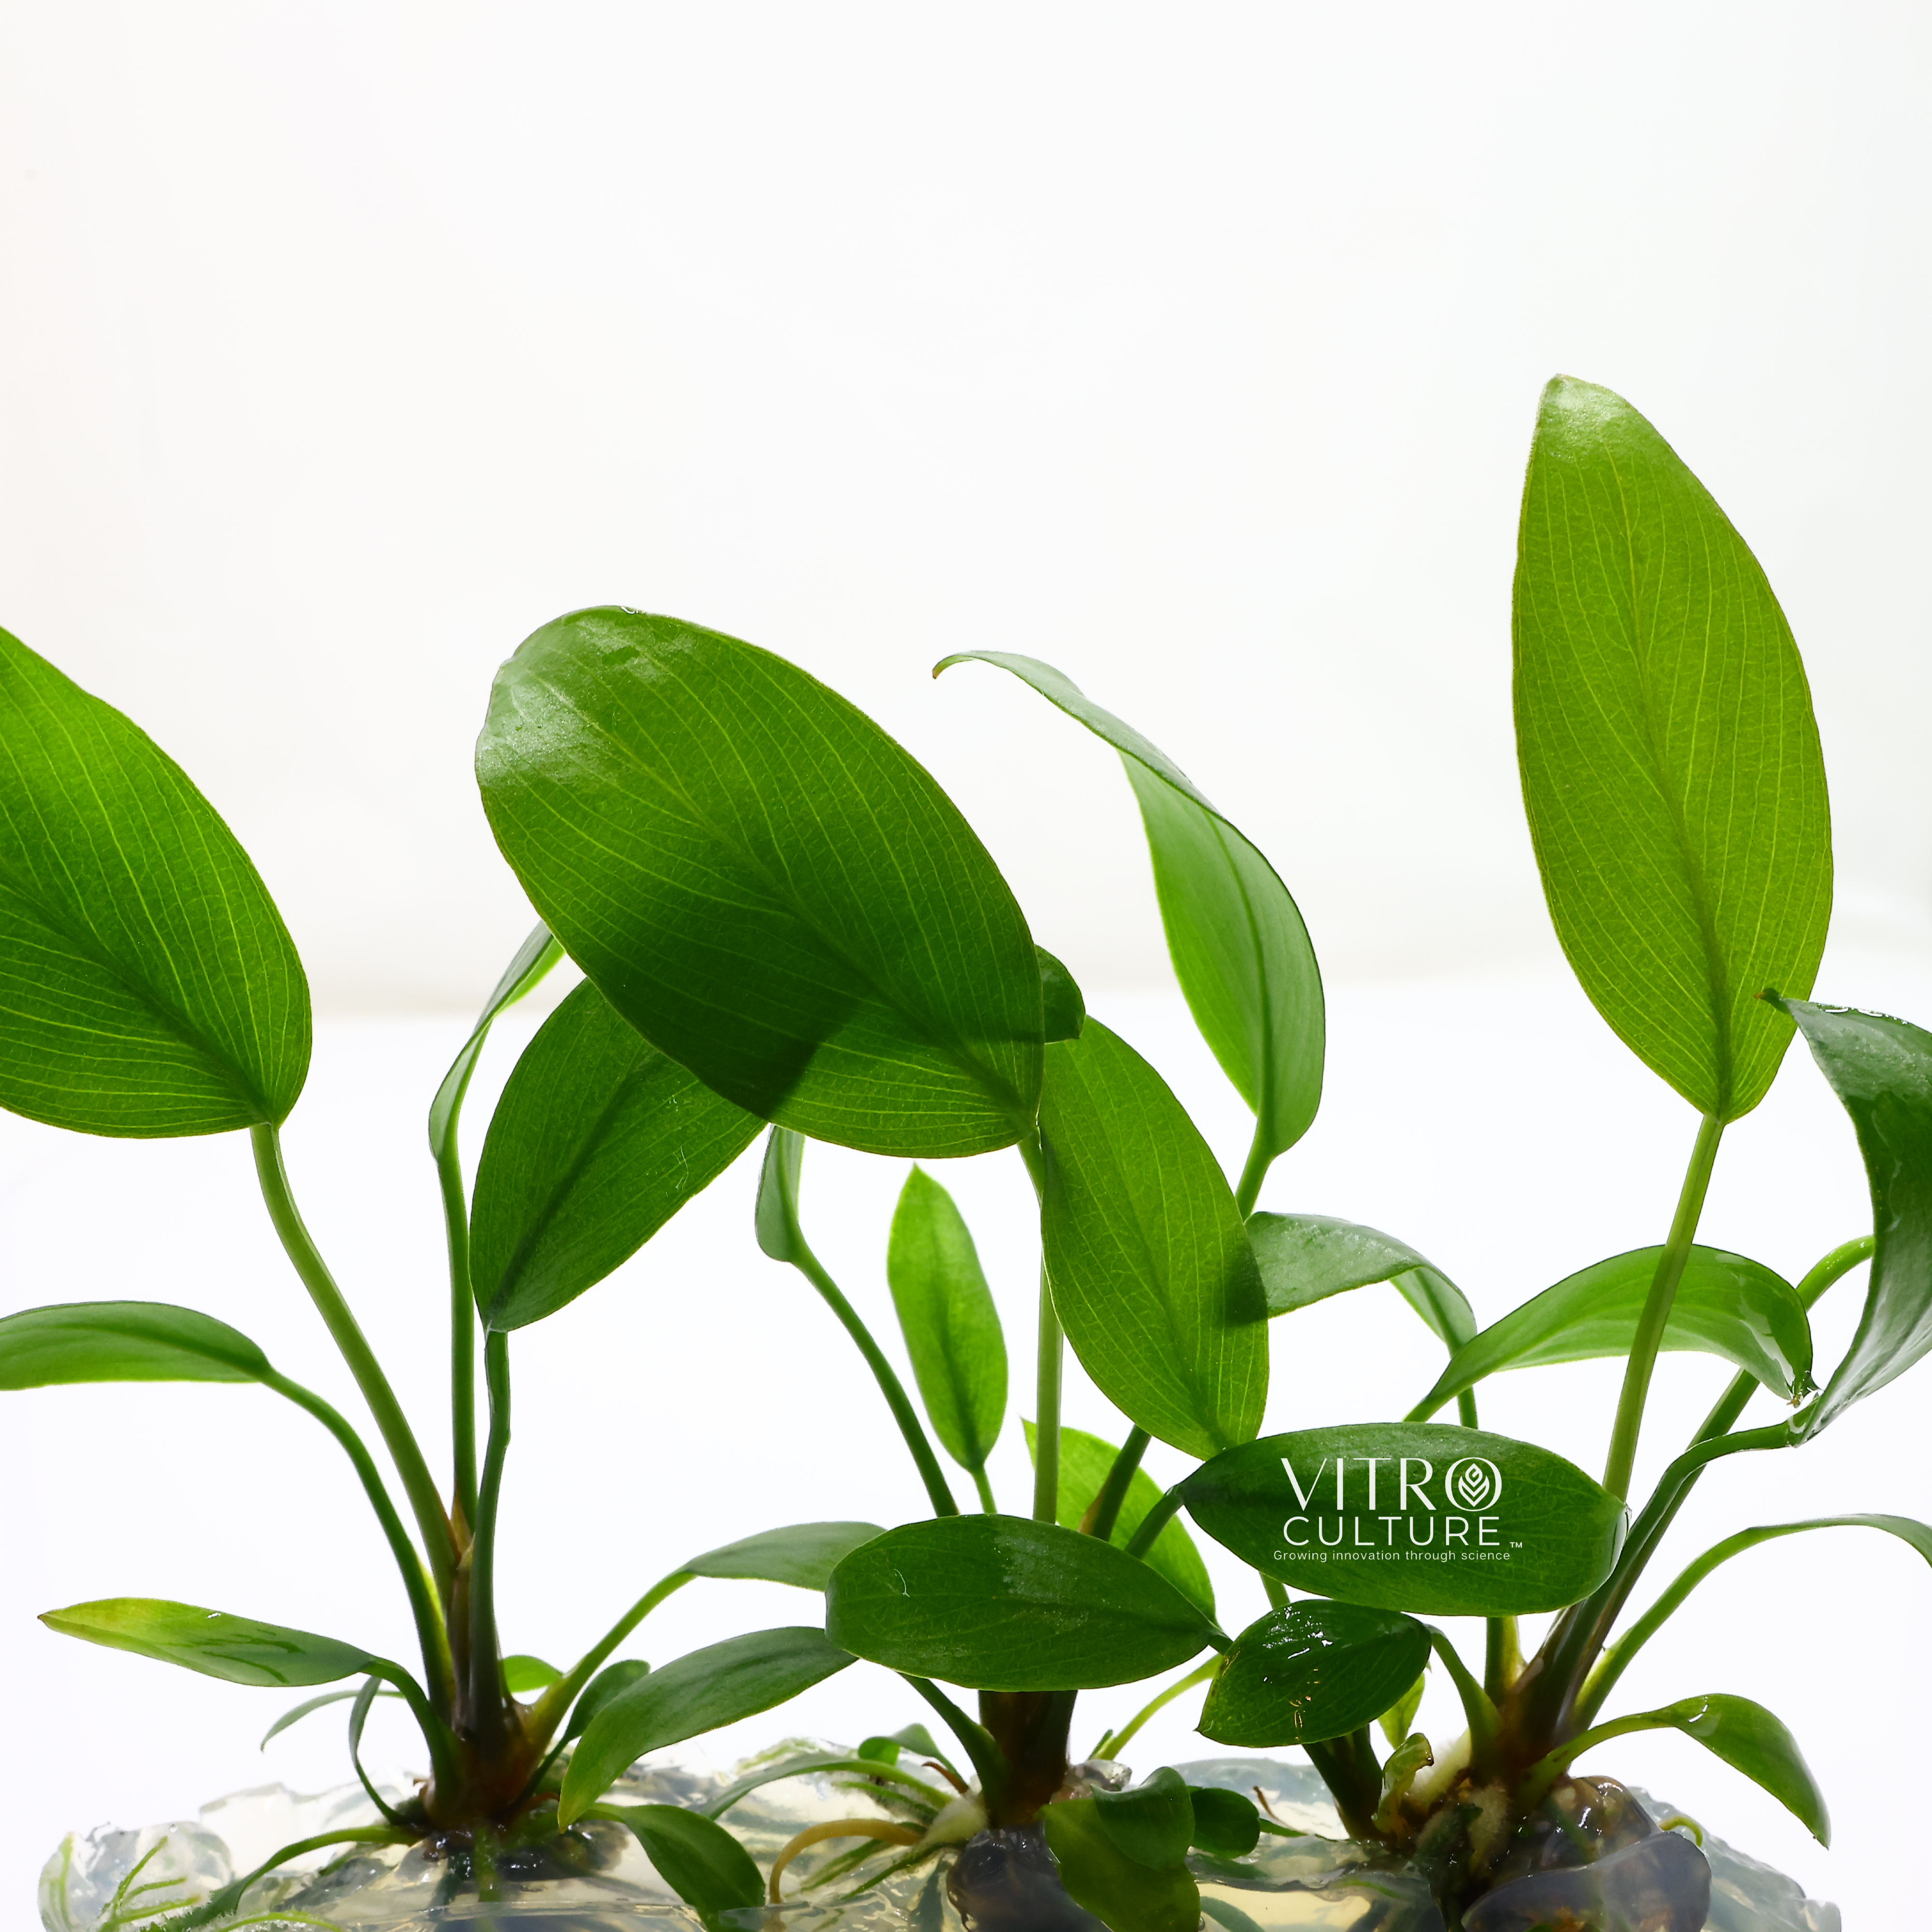 Anubias hastifolia is a great choice for aquarists looking to add a large and unique plant to their aquariums. Its sturdy leaves make it an excellent choice for providing hiding places for fish, and its slow growth rate and hardiness make it a low-maintenance plant that is suitable for beginners and experienced aquarists alike.